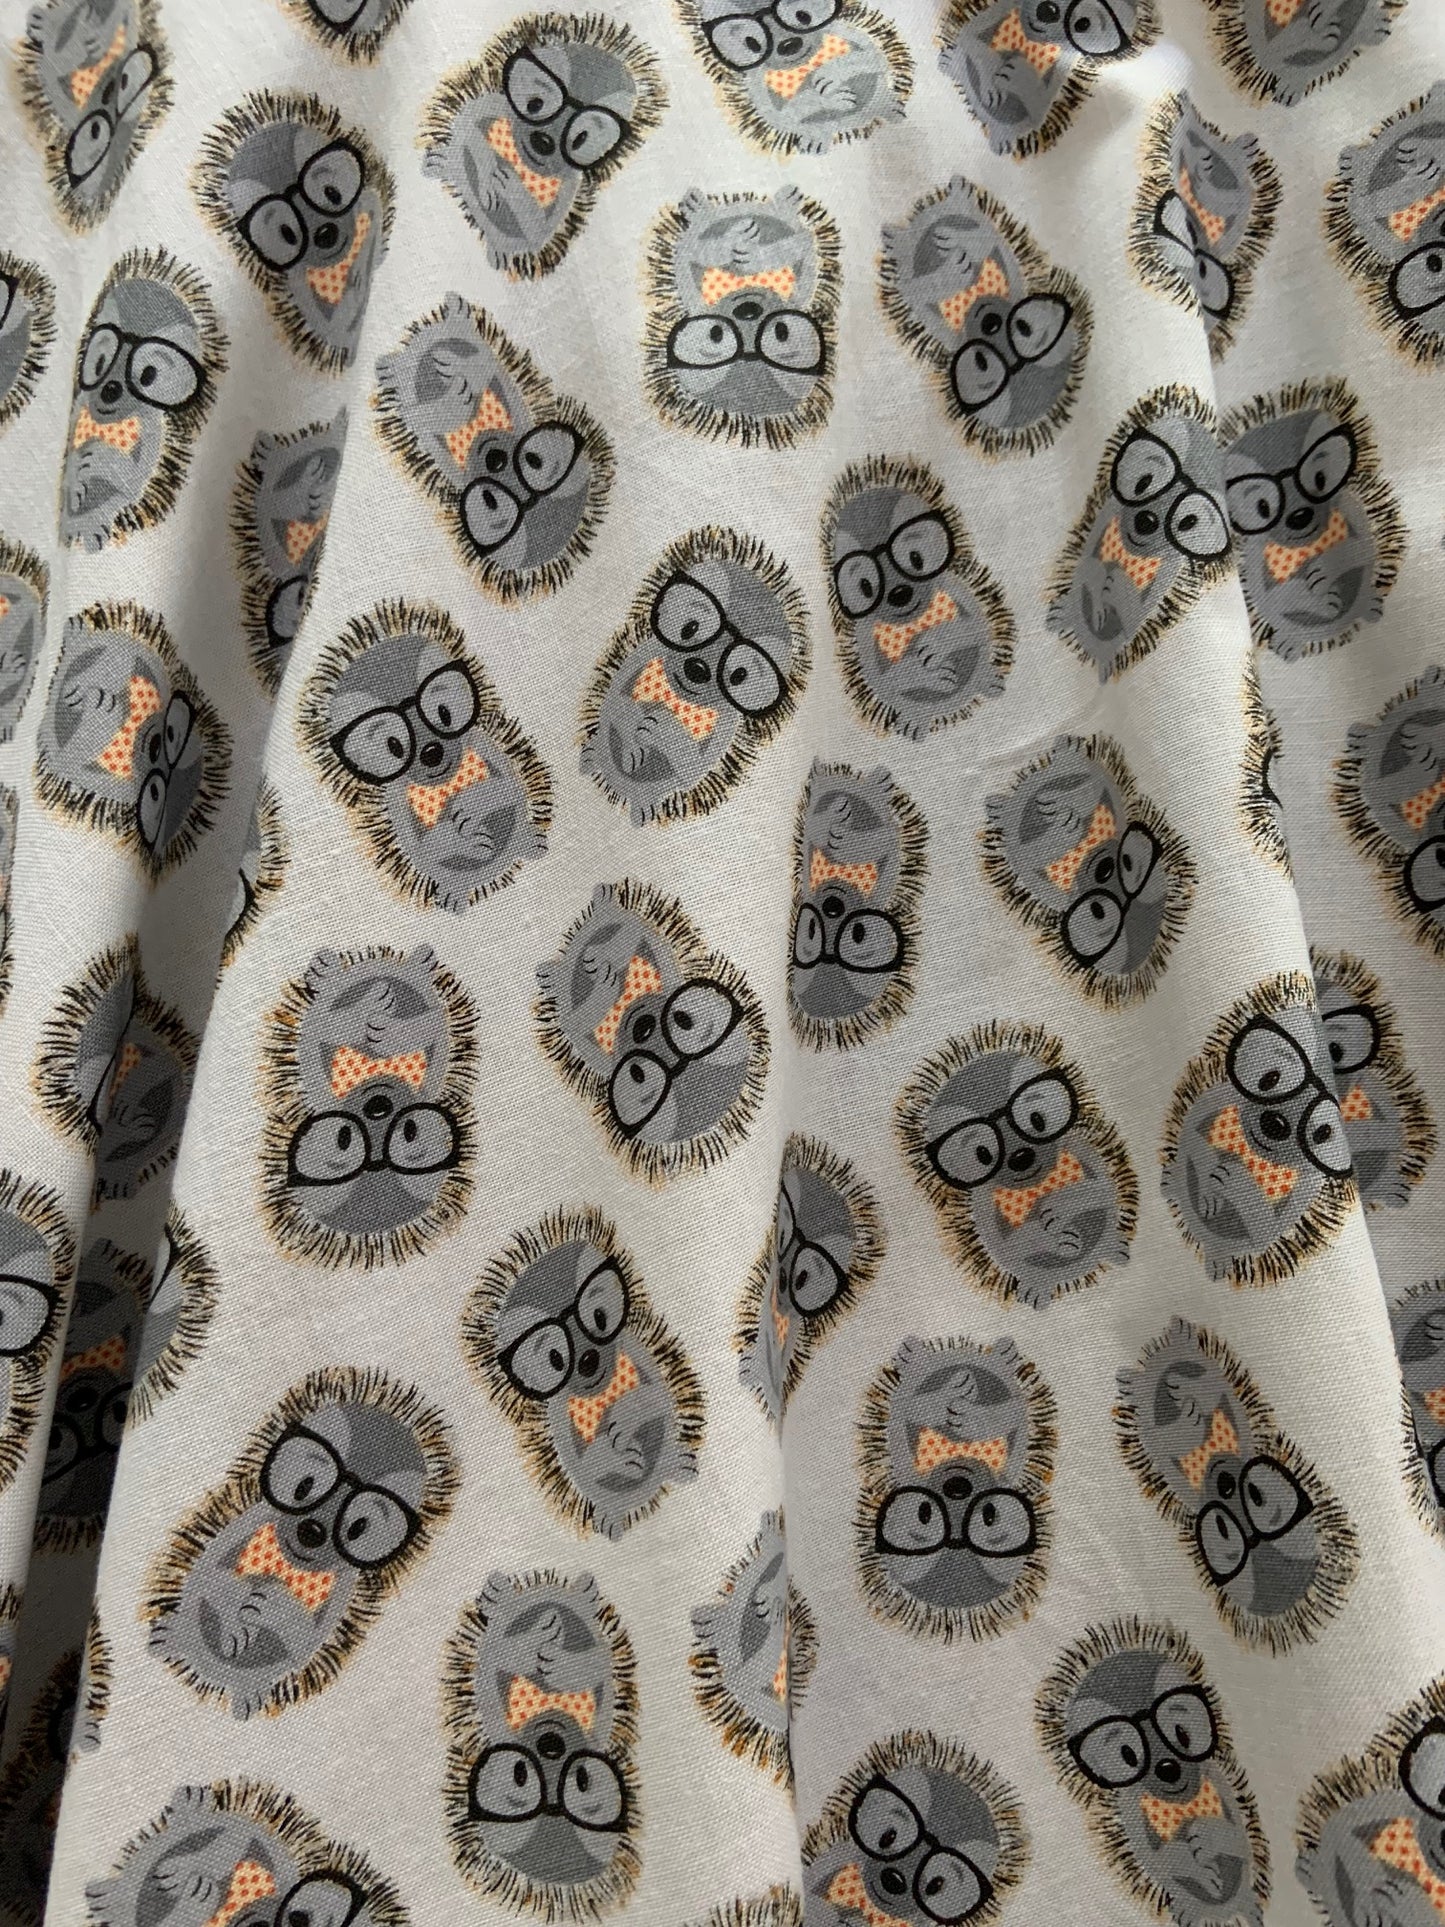 close up of fabric showing the hedgehogs in glasses in bow tie